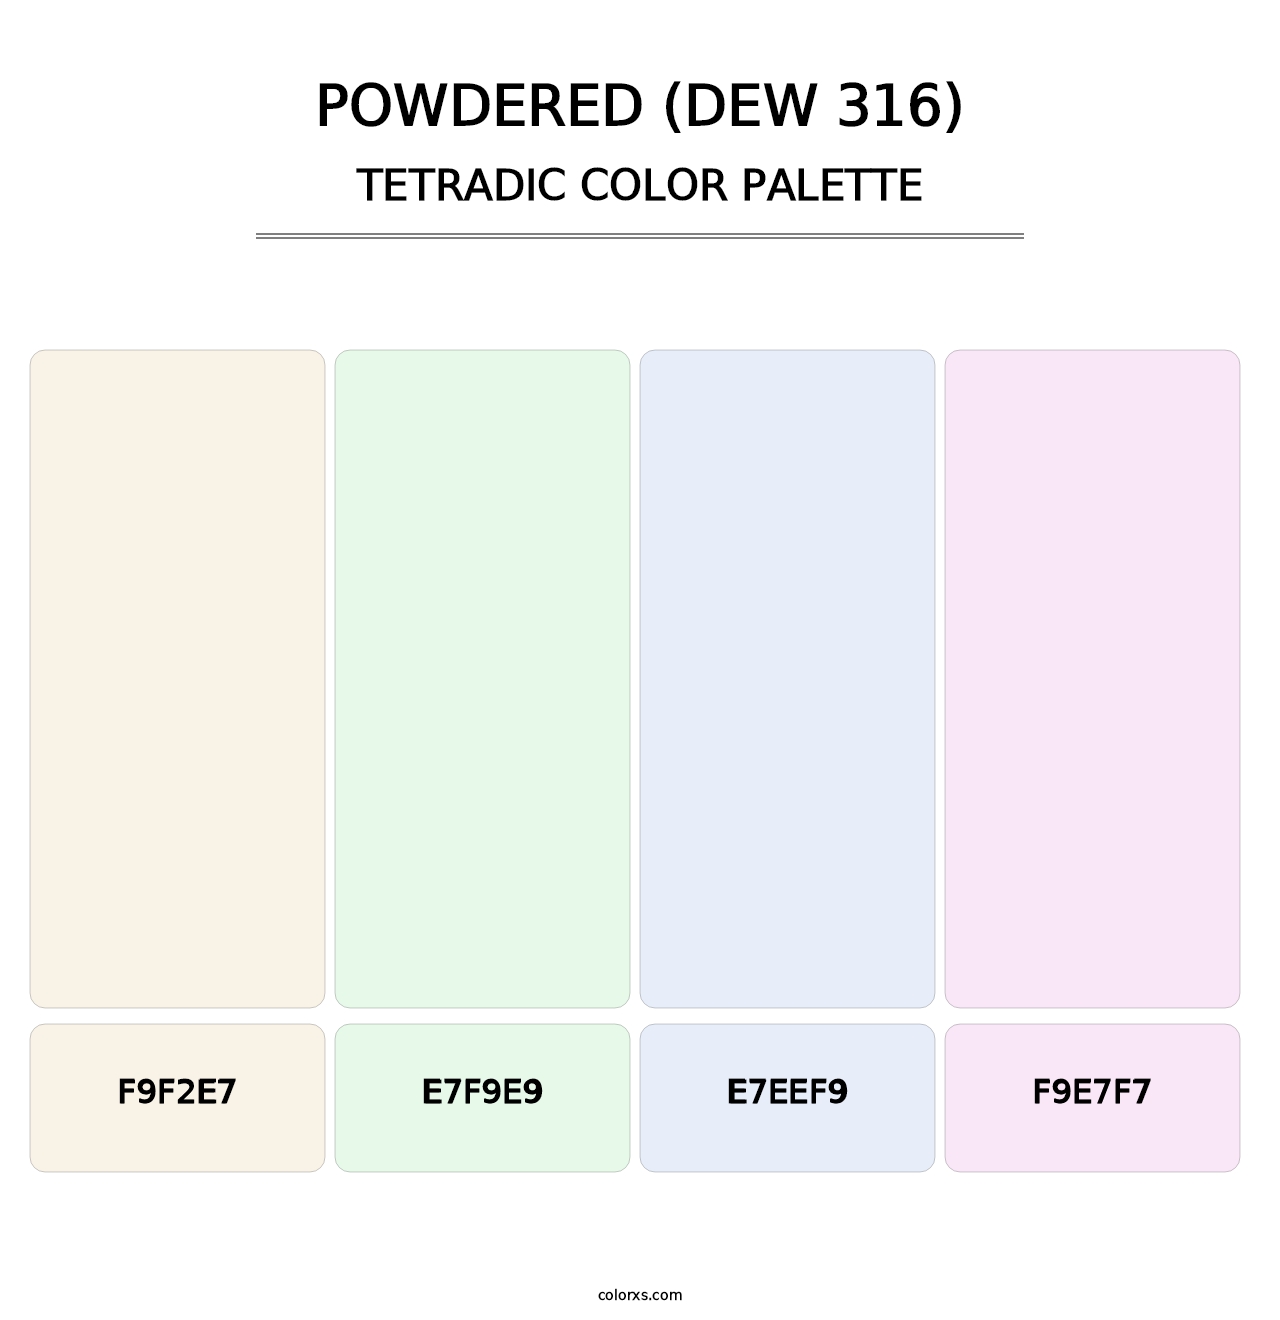 Powdered (DEW 316) - Tetradic Color Palette